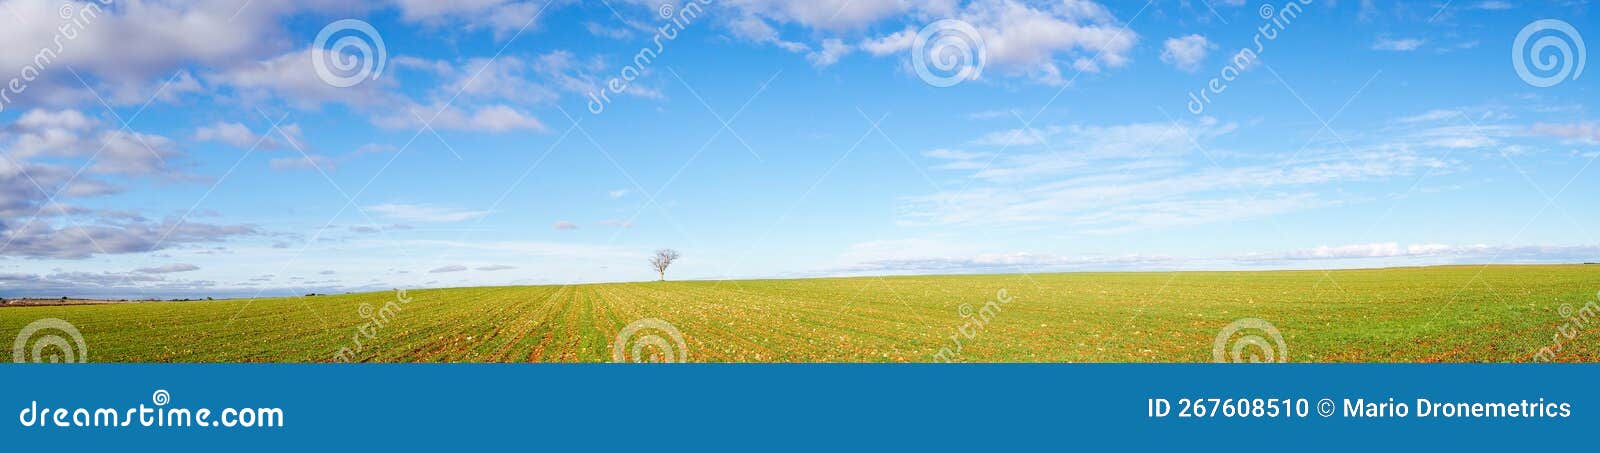 amazing panoramic image of blue skies and white scattered clouds and green farmed ground with a single tree